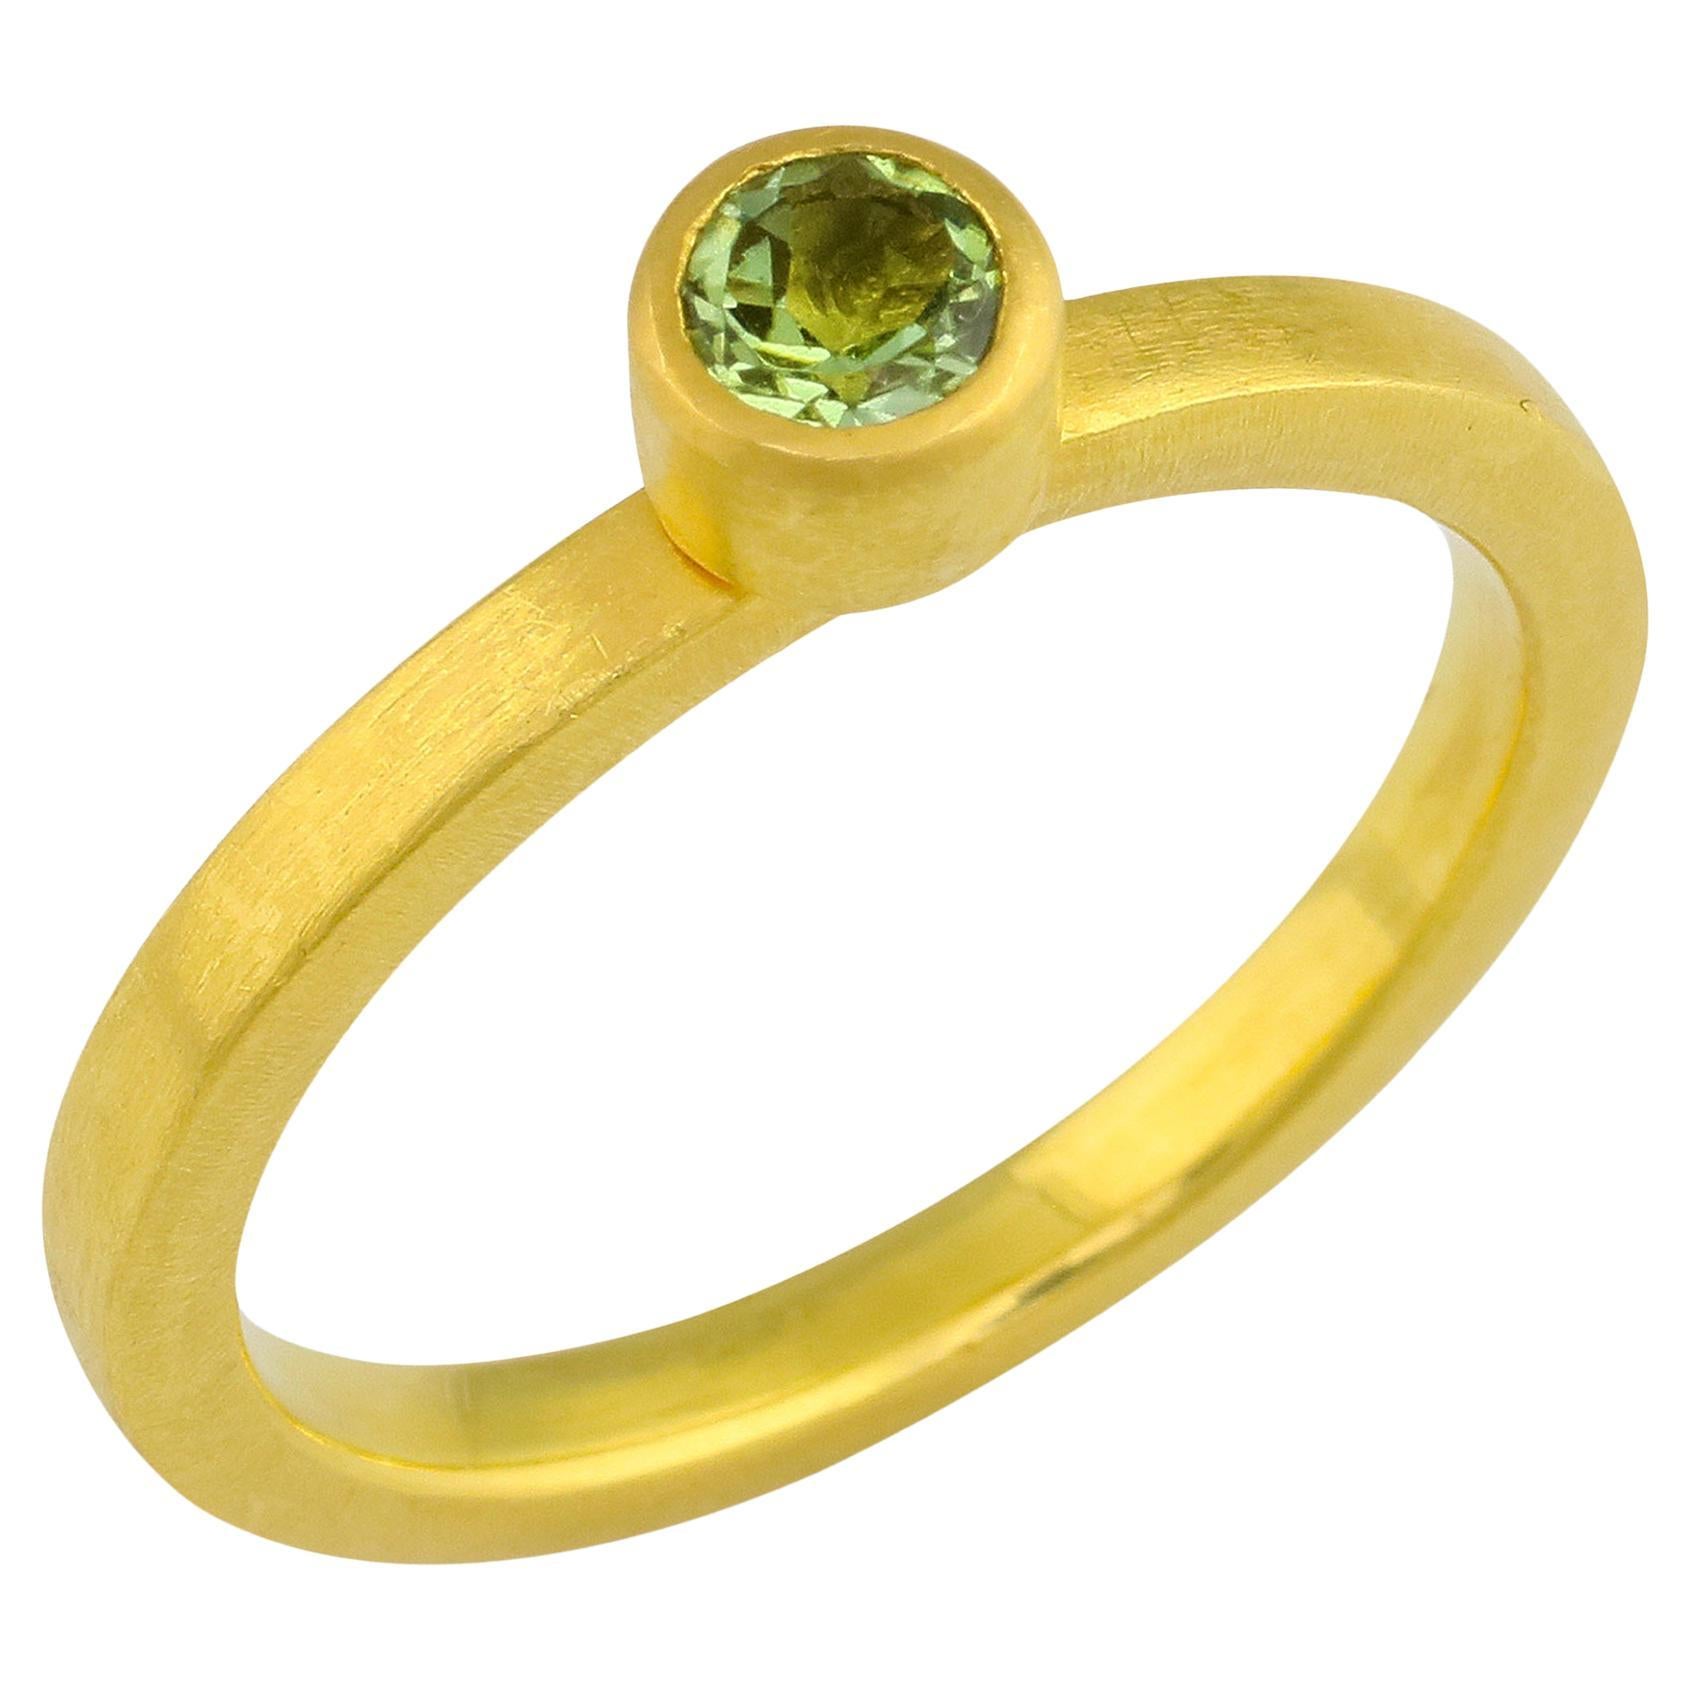 PHILIPPE SPENCER .28 Ct. Green Tourmaline in 22K and 20K Gold Solitaire Ring